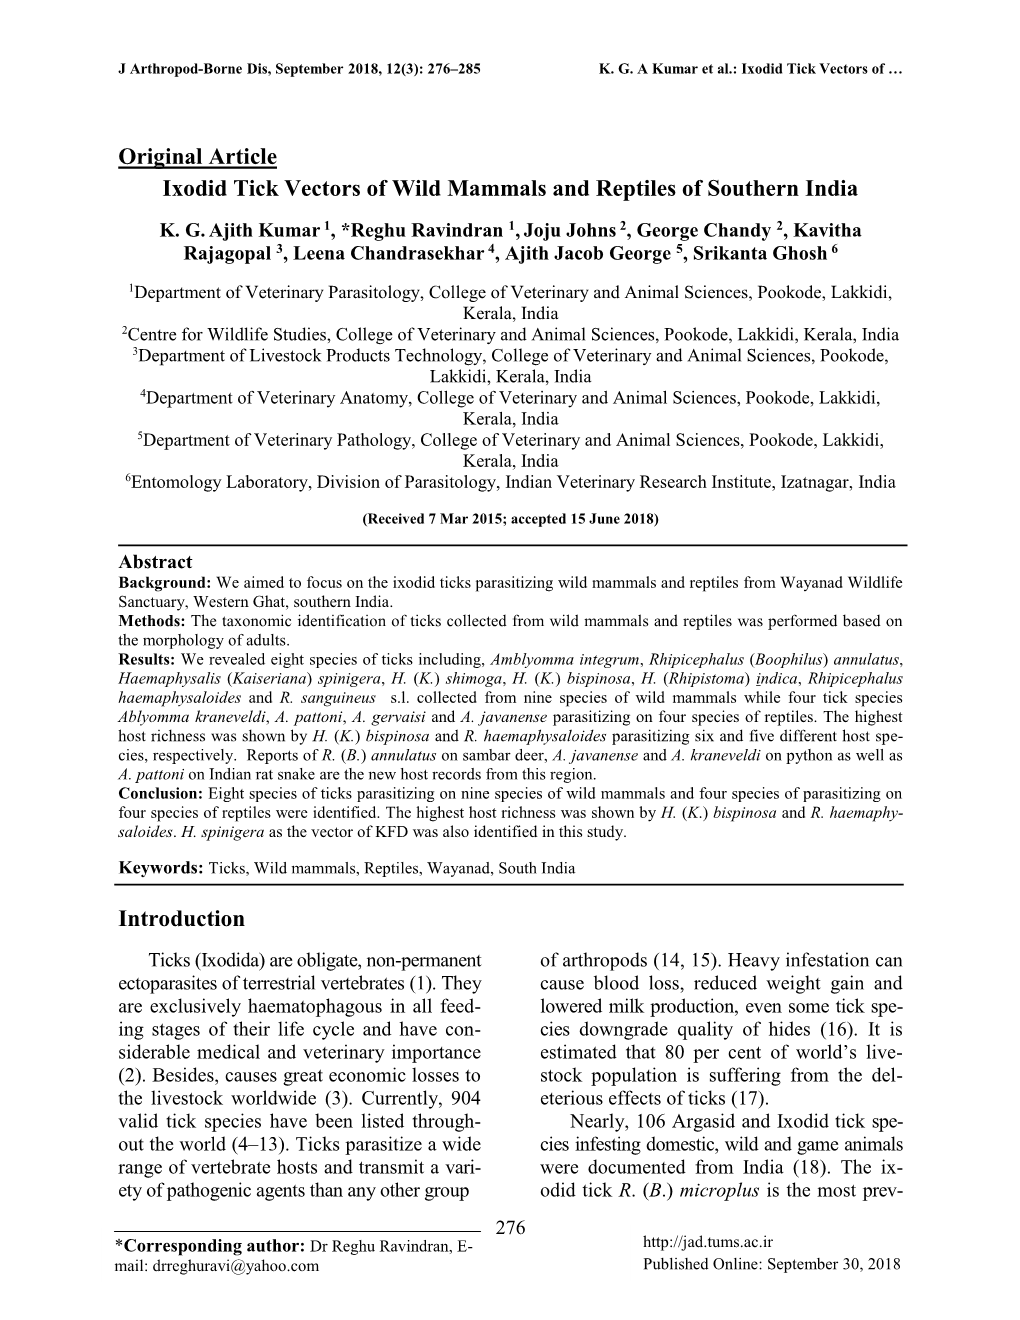 Ixodid Tick Vectors of Wild Mammals and Reptiles of Southern India